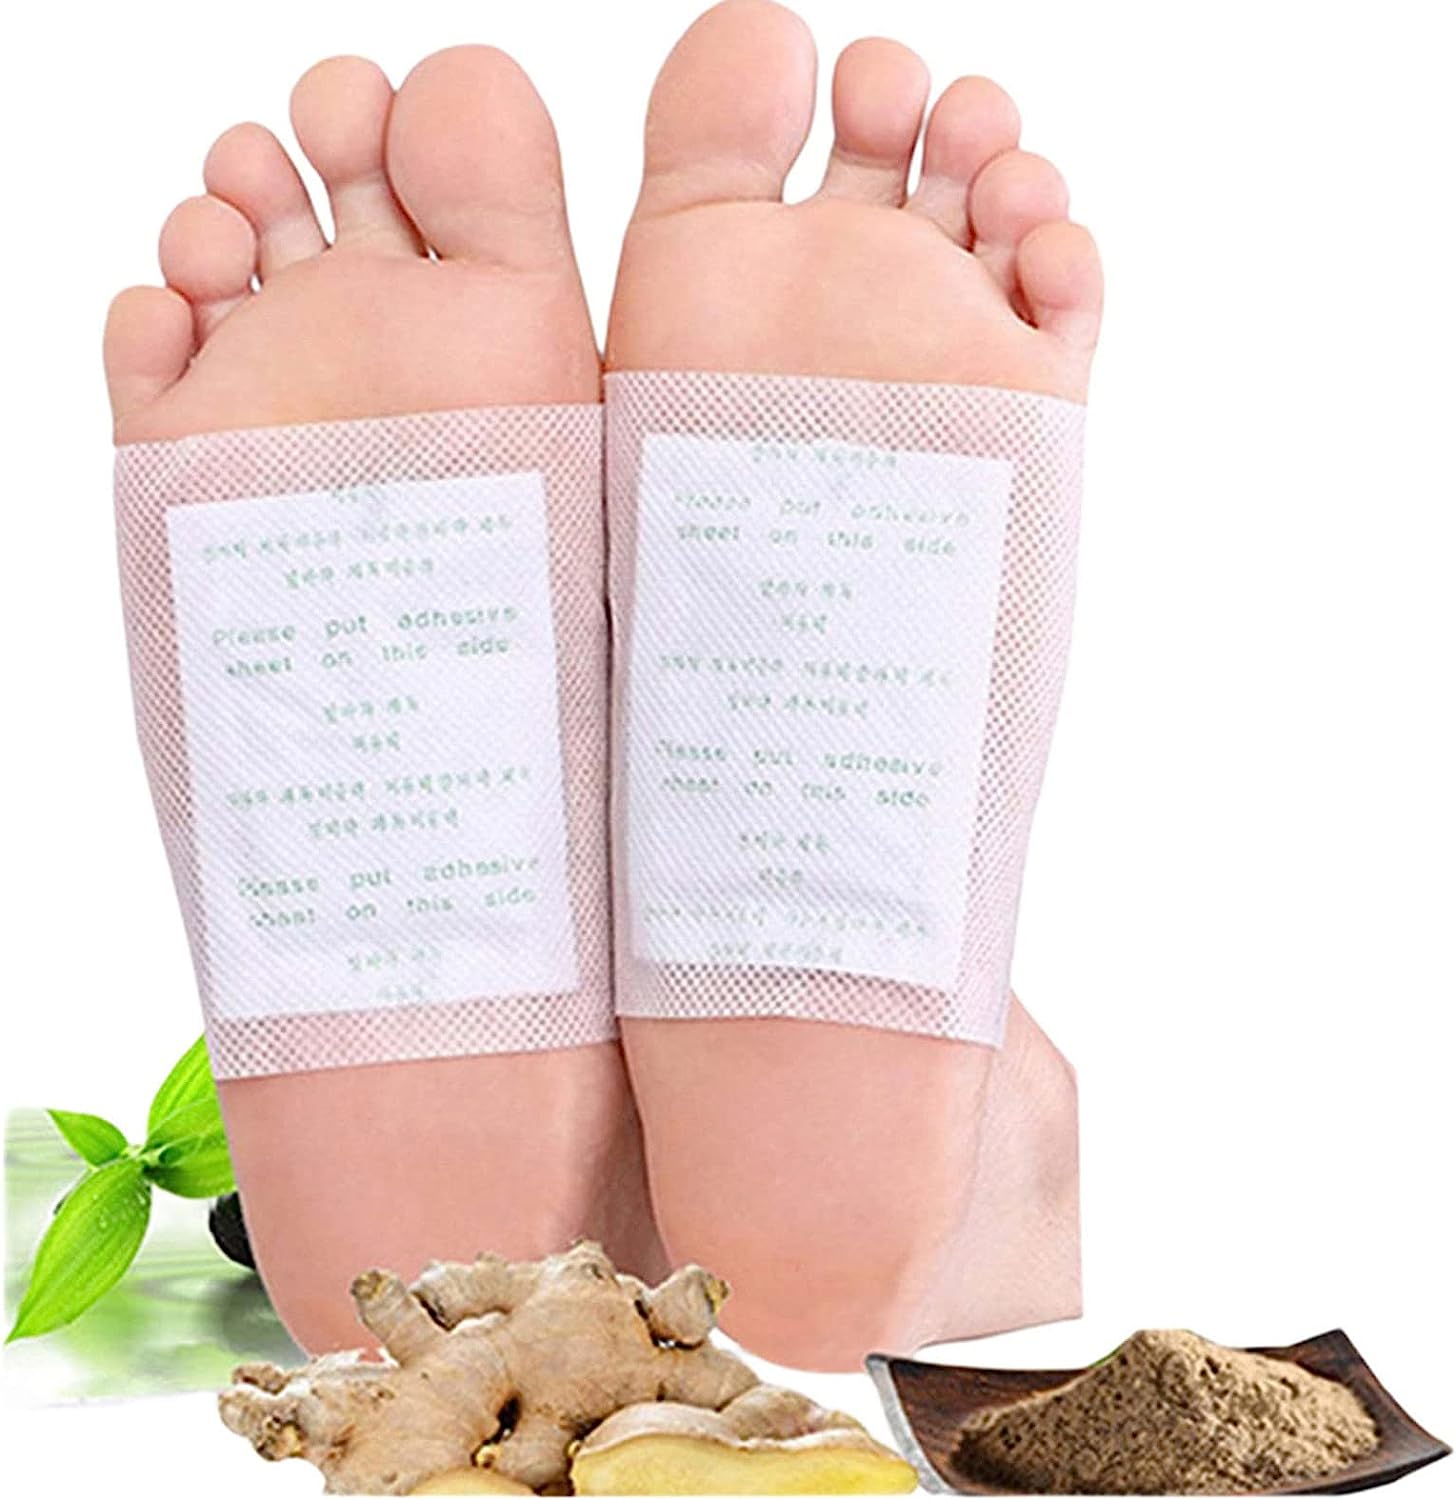 Foot Pads 100 Pieces Foot Patches Deep Cleansing Foot [...]